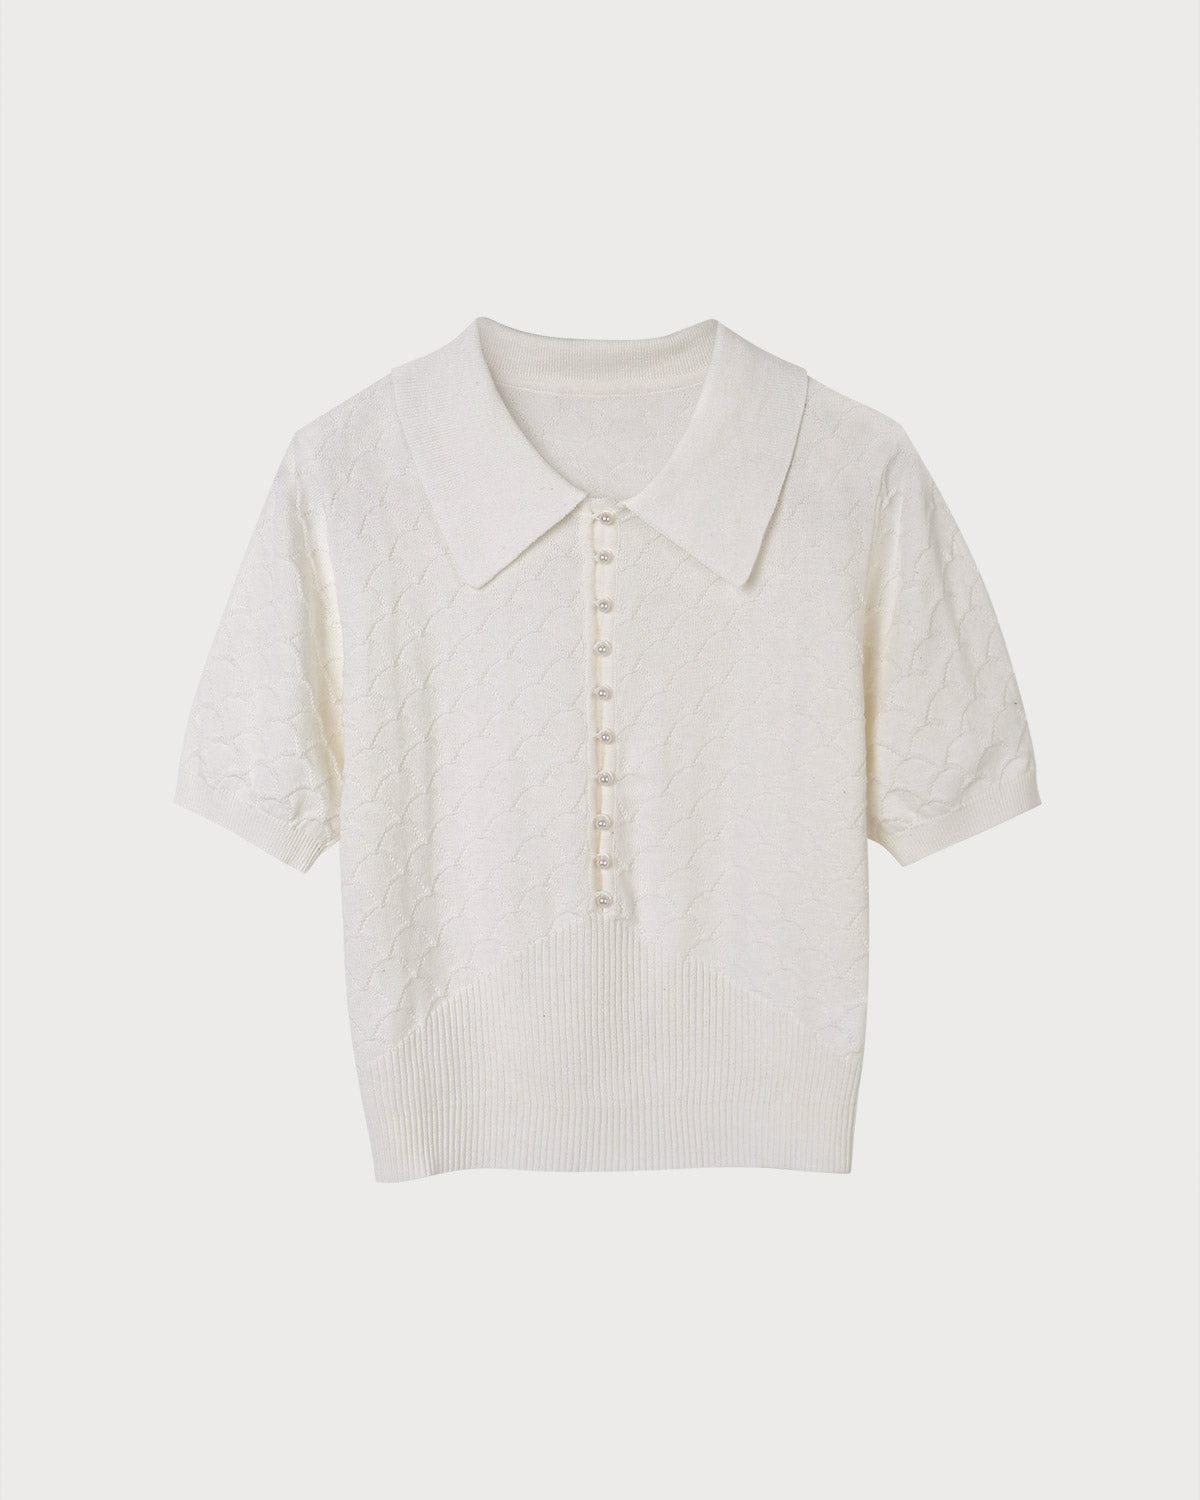 The Solid Textured Knitted Tee & Reviews - White - Tops | RIHOAS